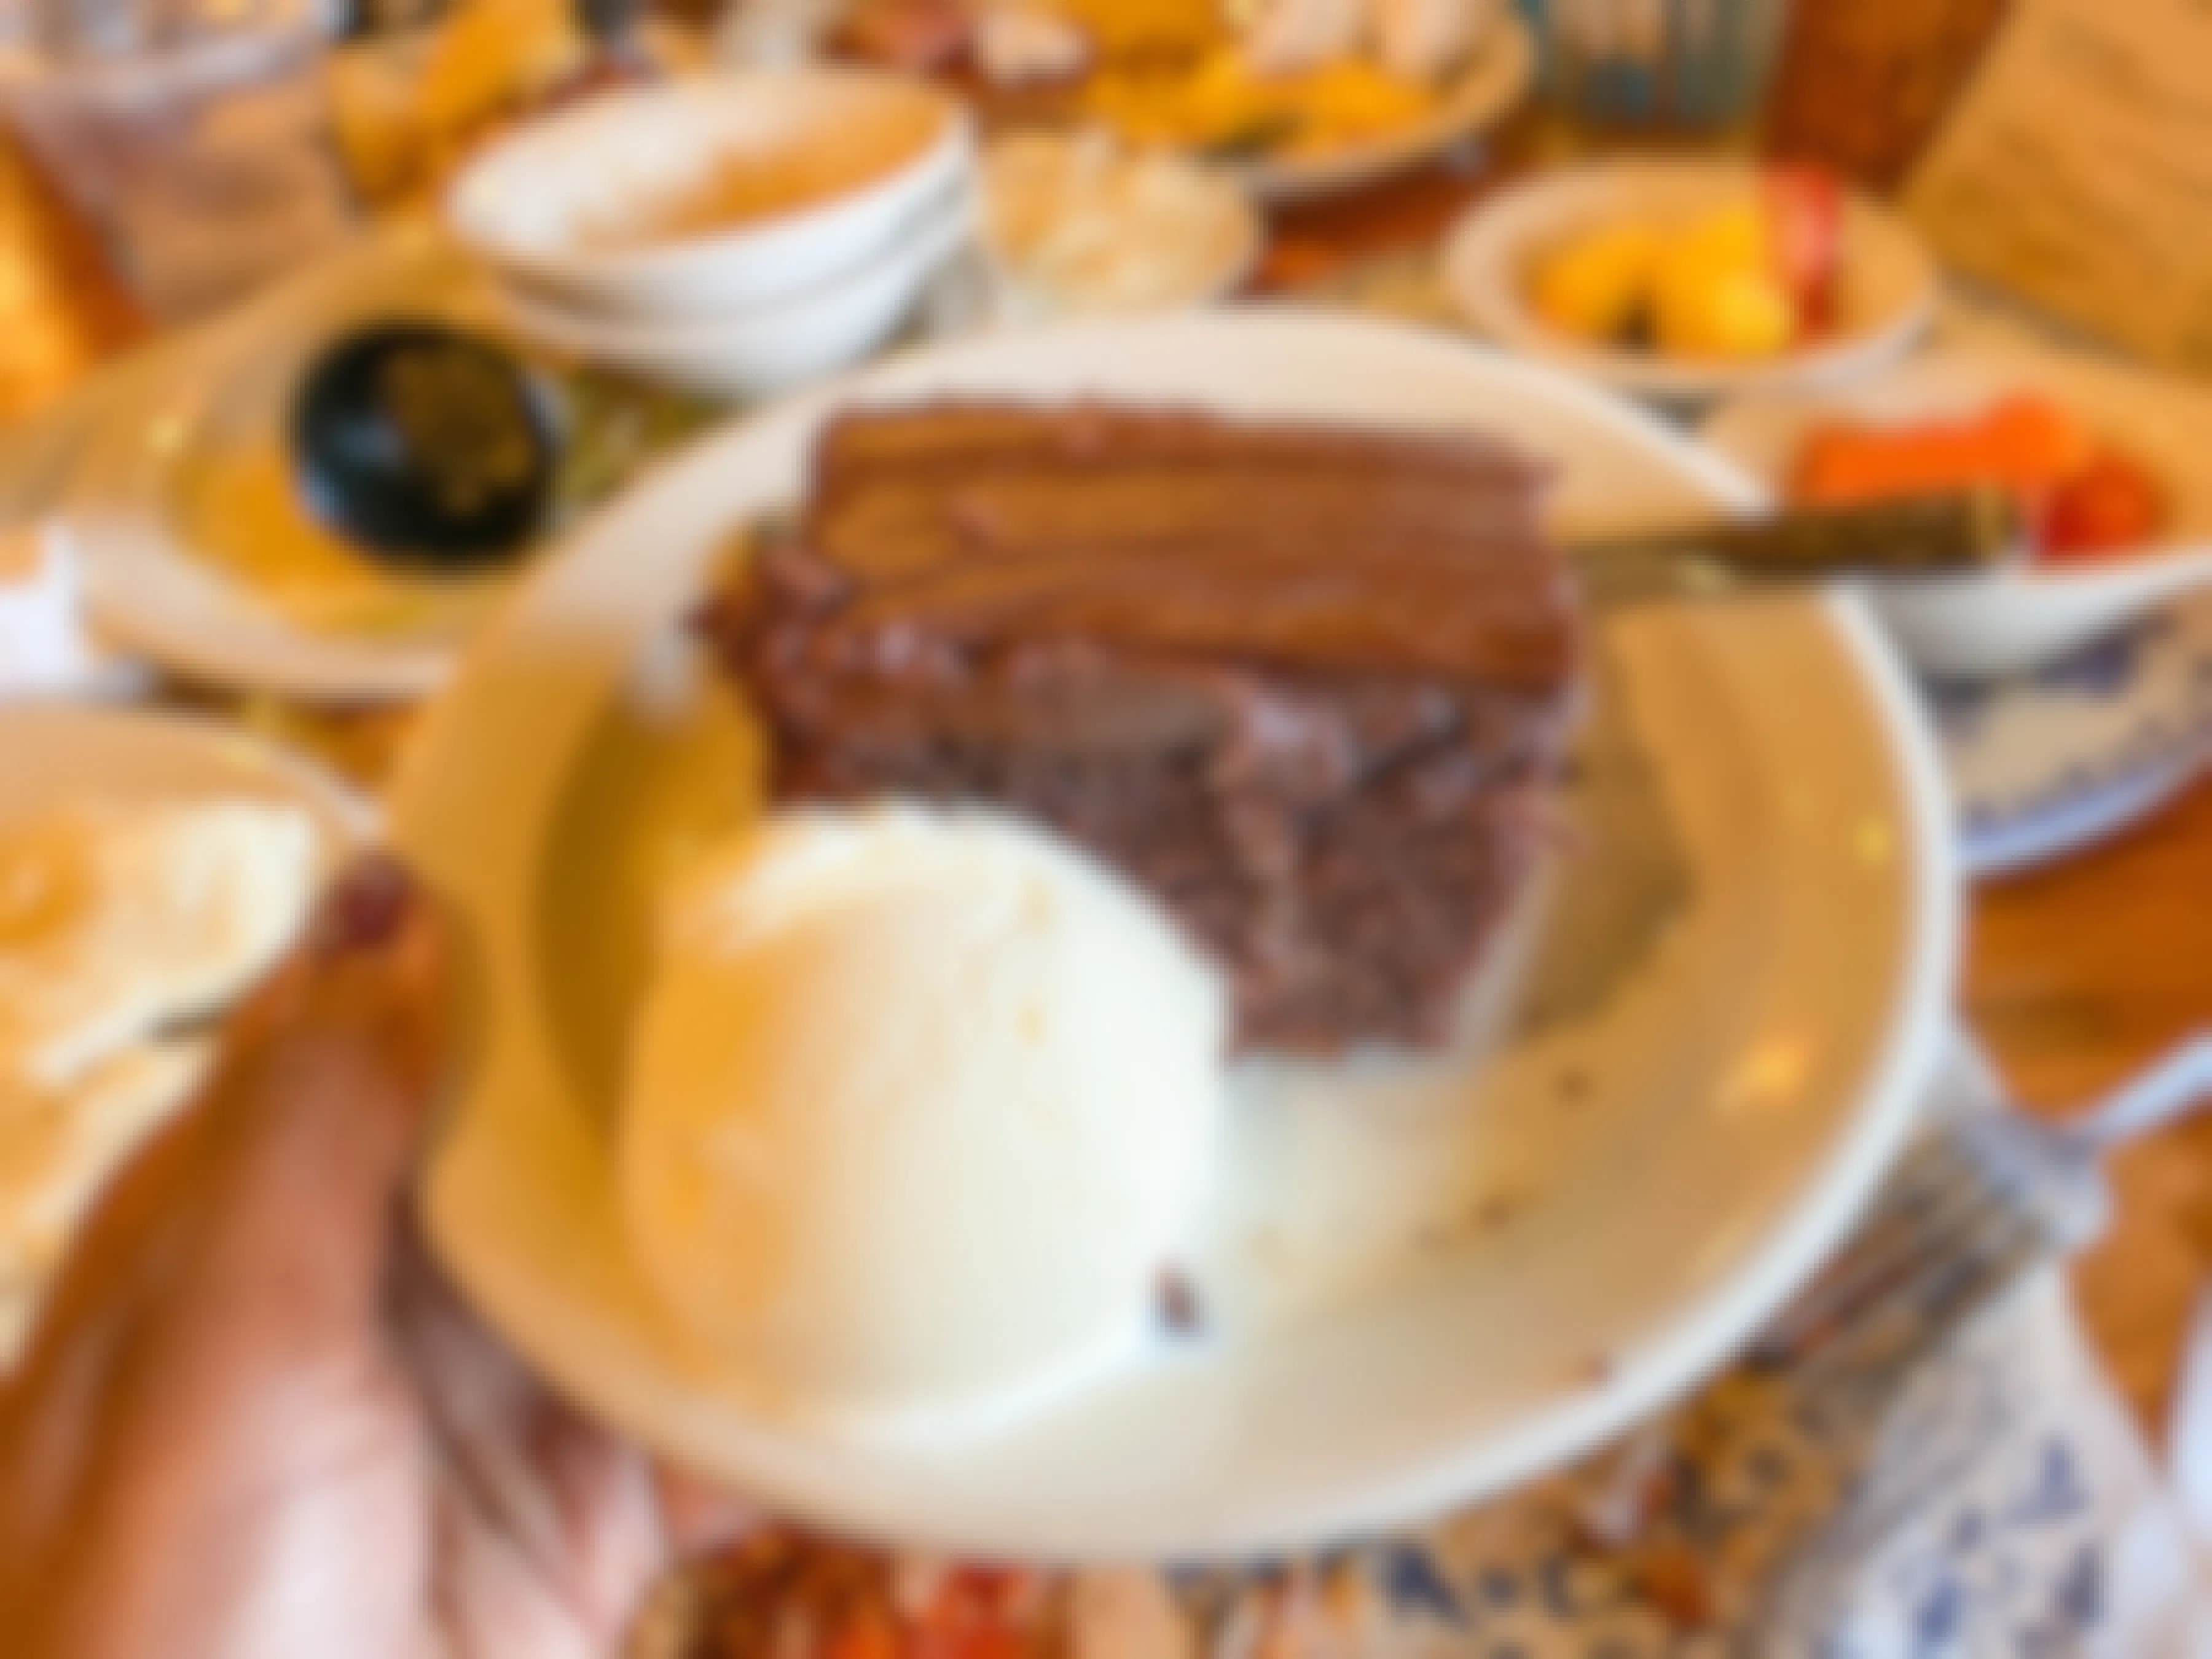 A person's hand holding up a plate with a Cracker Barrel brownie and ice cream dessert on it.